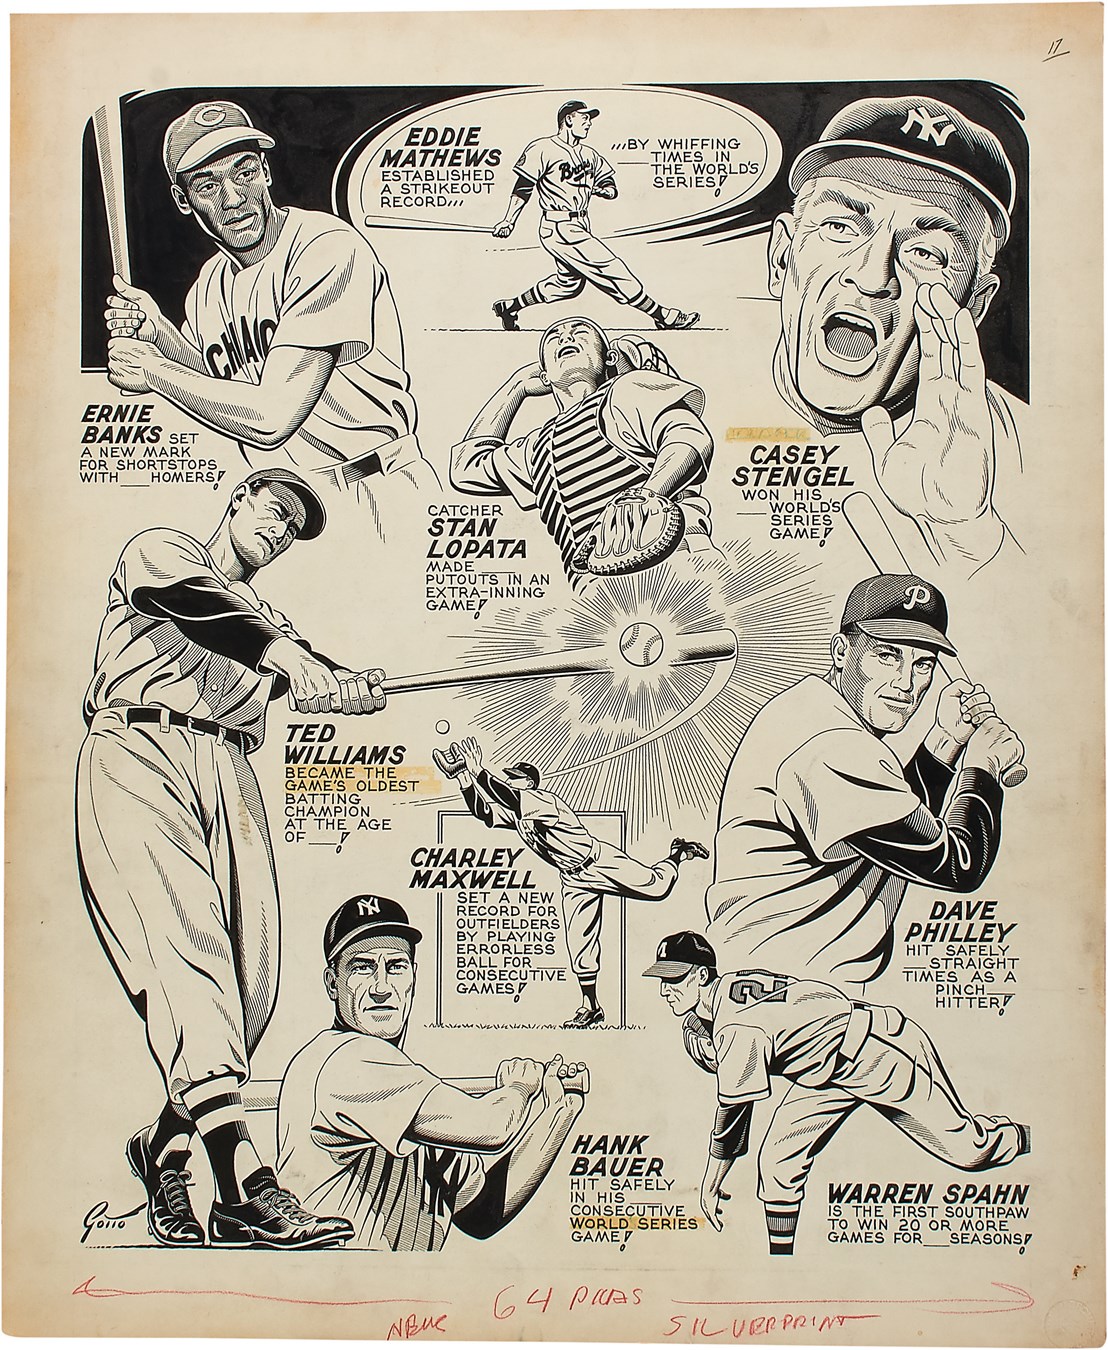 Sports Fine Art - 1958 Ted Williams, Ernie Banks, Casey Stengel, Warren Spahn "Records" by Ray Gotto - Published in The Sporting News